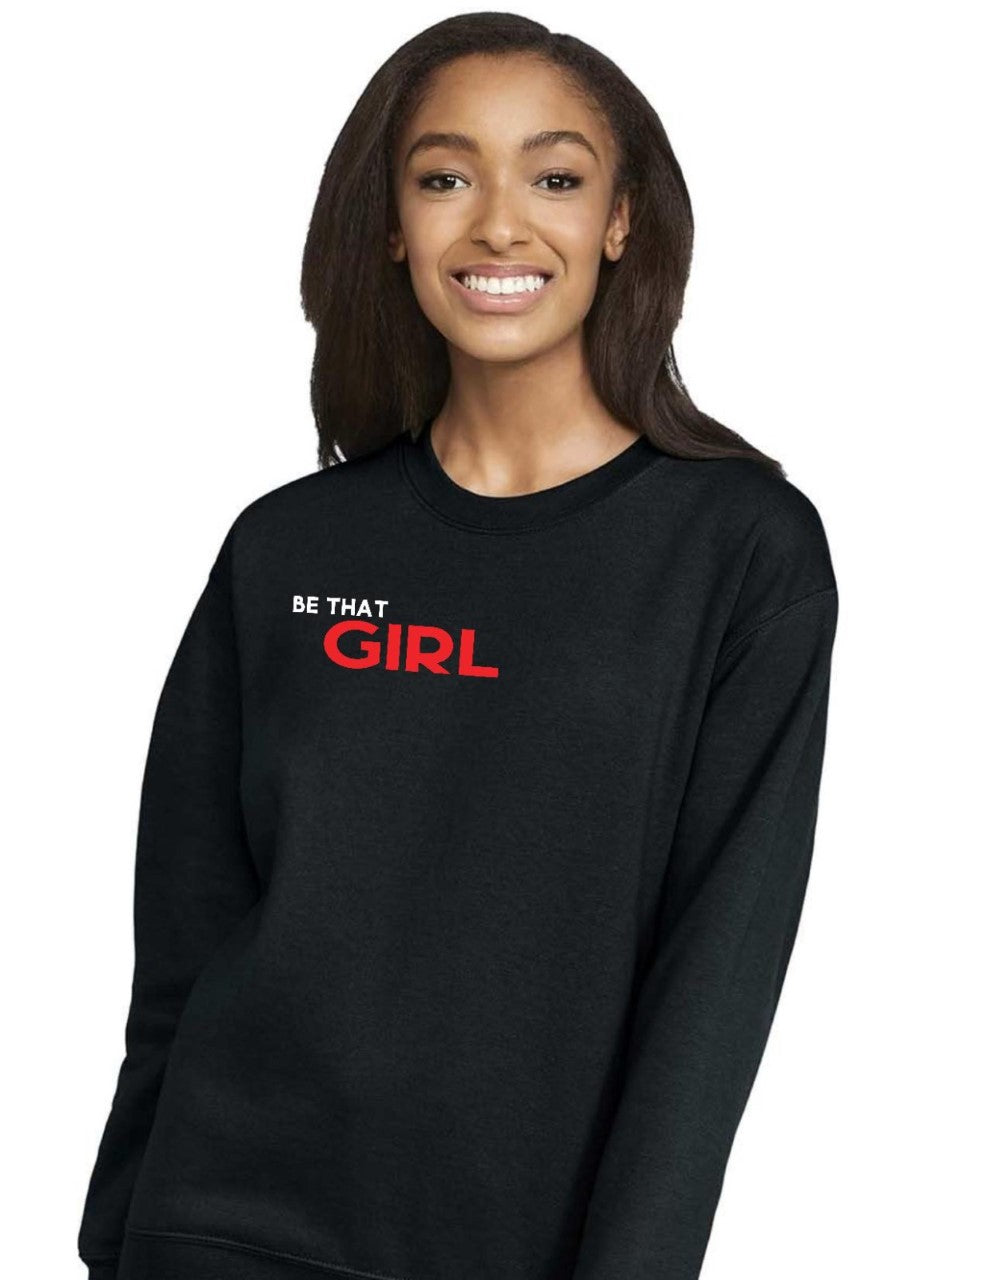 Be That Girl **Limited Edition Sweater PRE-ORDER